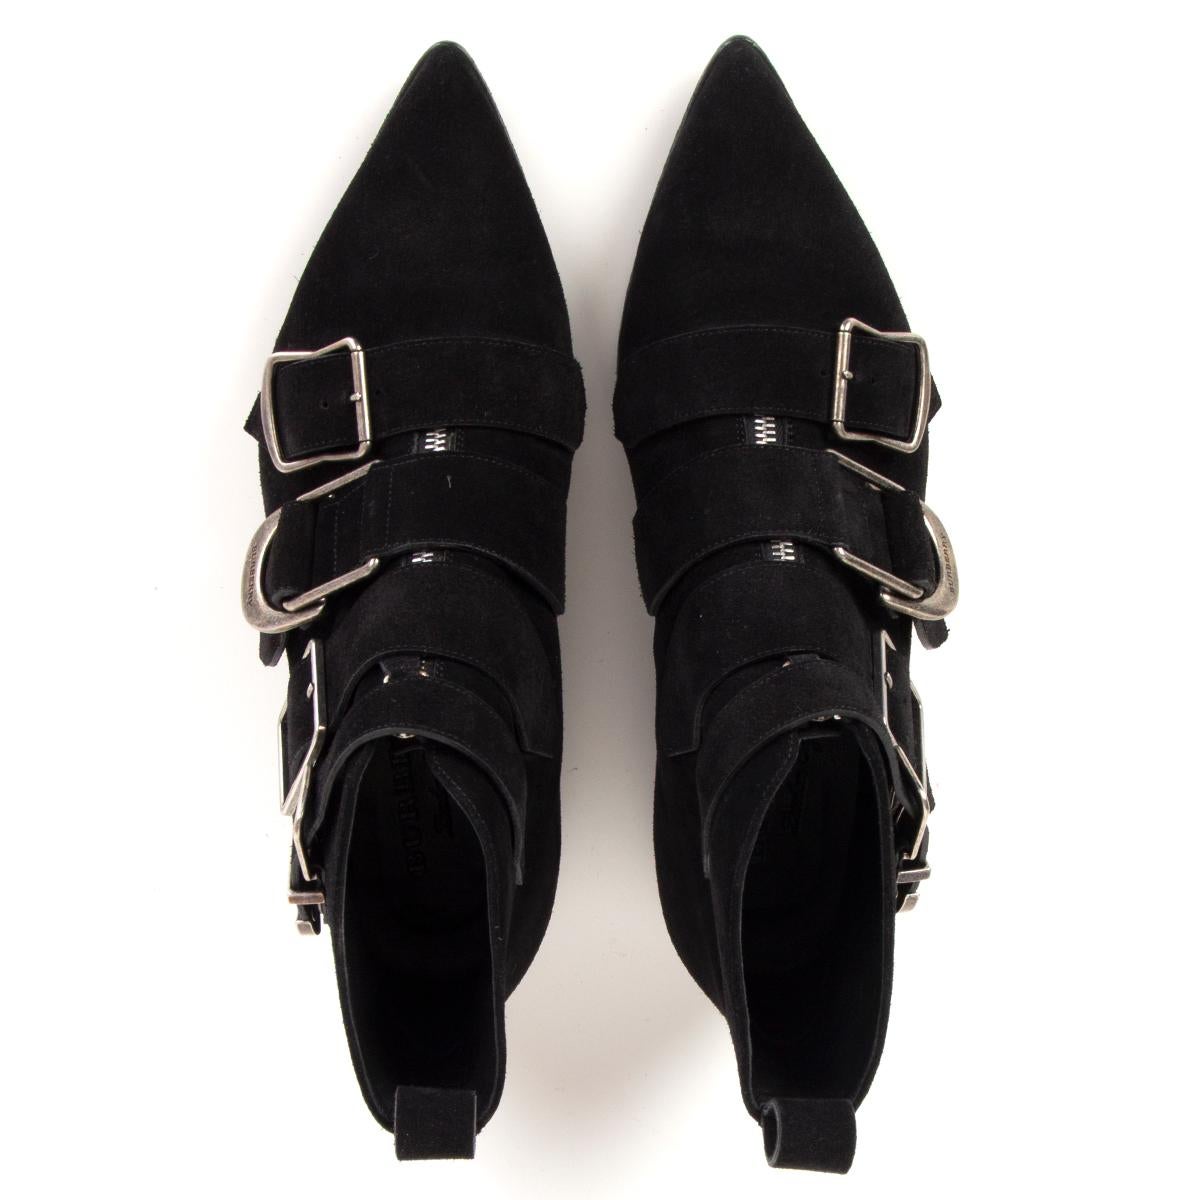 BURBERRY black suede MILNER BUCKLE DETAILS Ankle Boots Shoes 39 In Excellent Condition For Sale In Zürich, CH